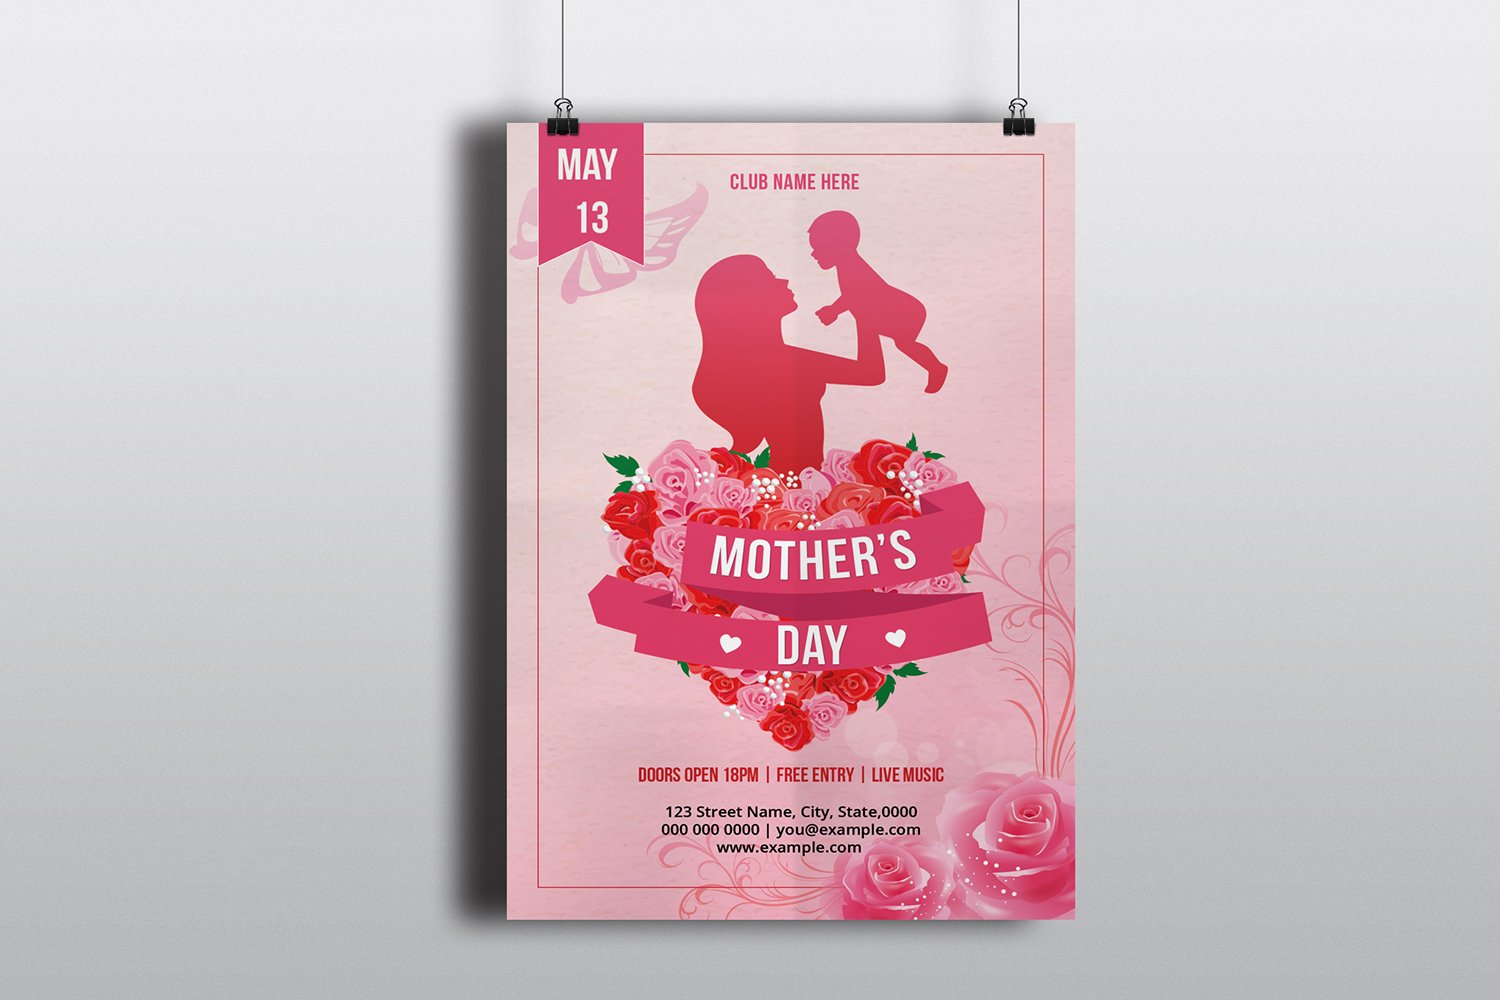 Mother's Day Festival Invitation Flyer Corporate Identity Template